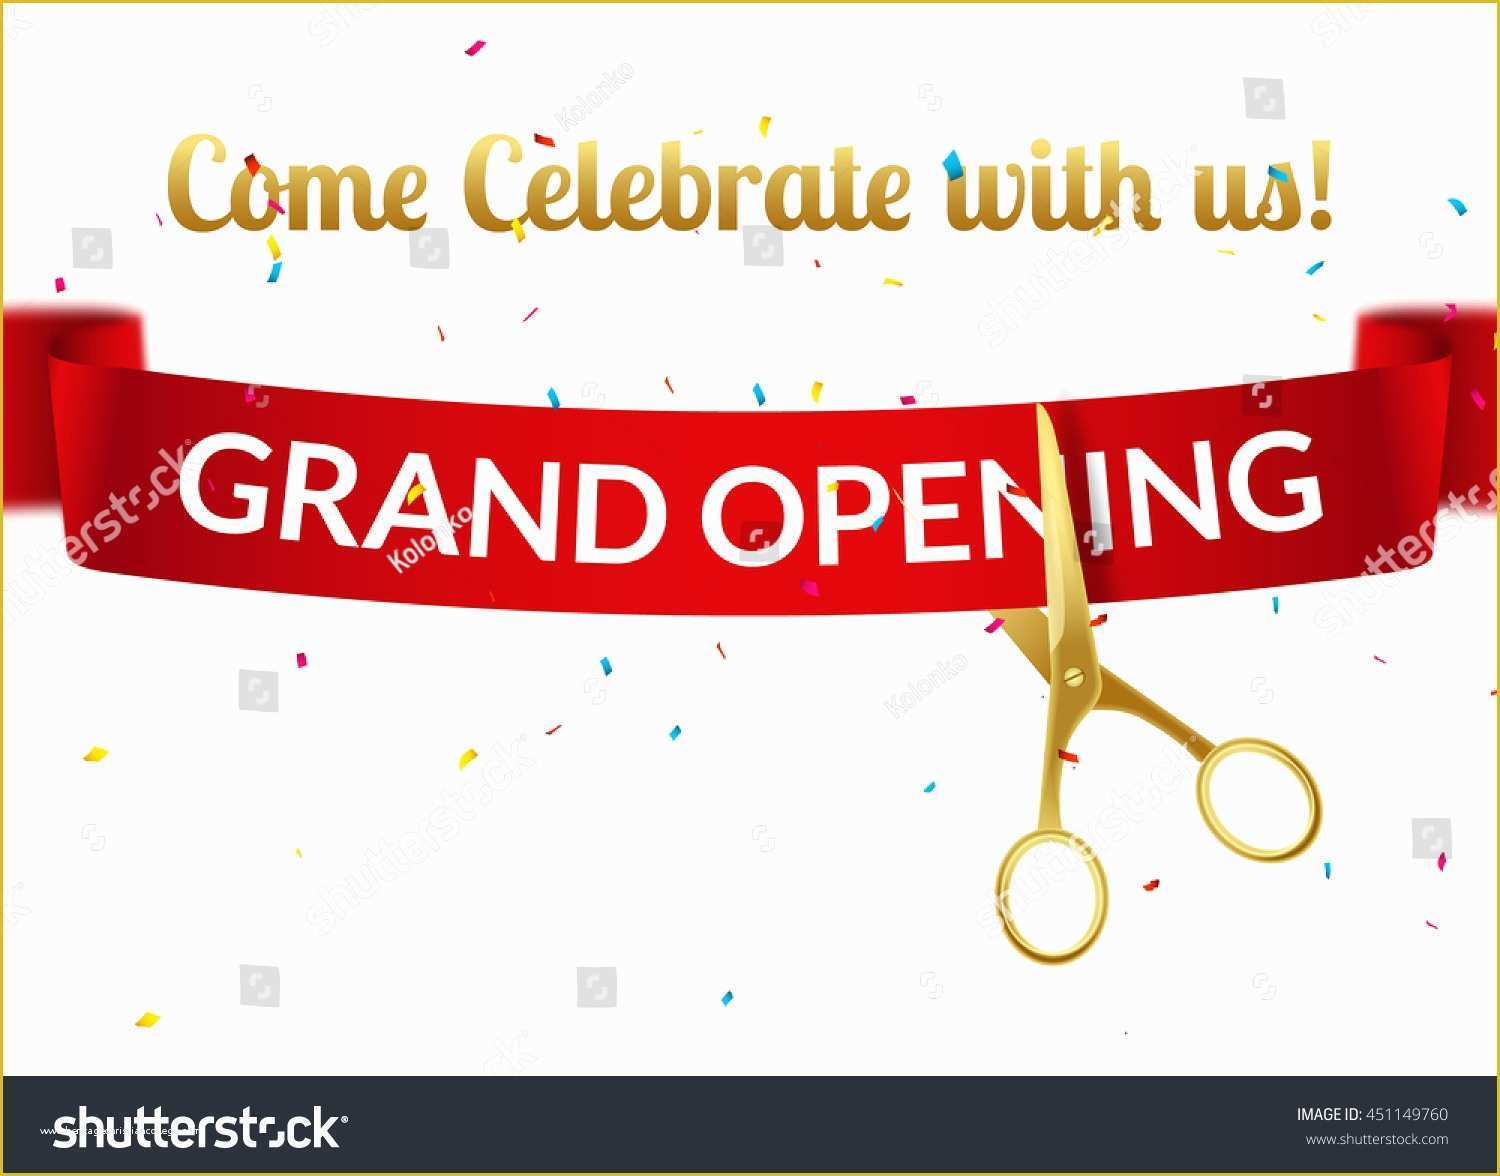 Grand Opening Invitation Template Free Of Grand Opening Design Template Ribbon Scissors Stock Vector